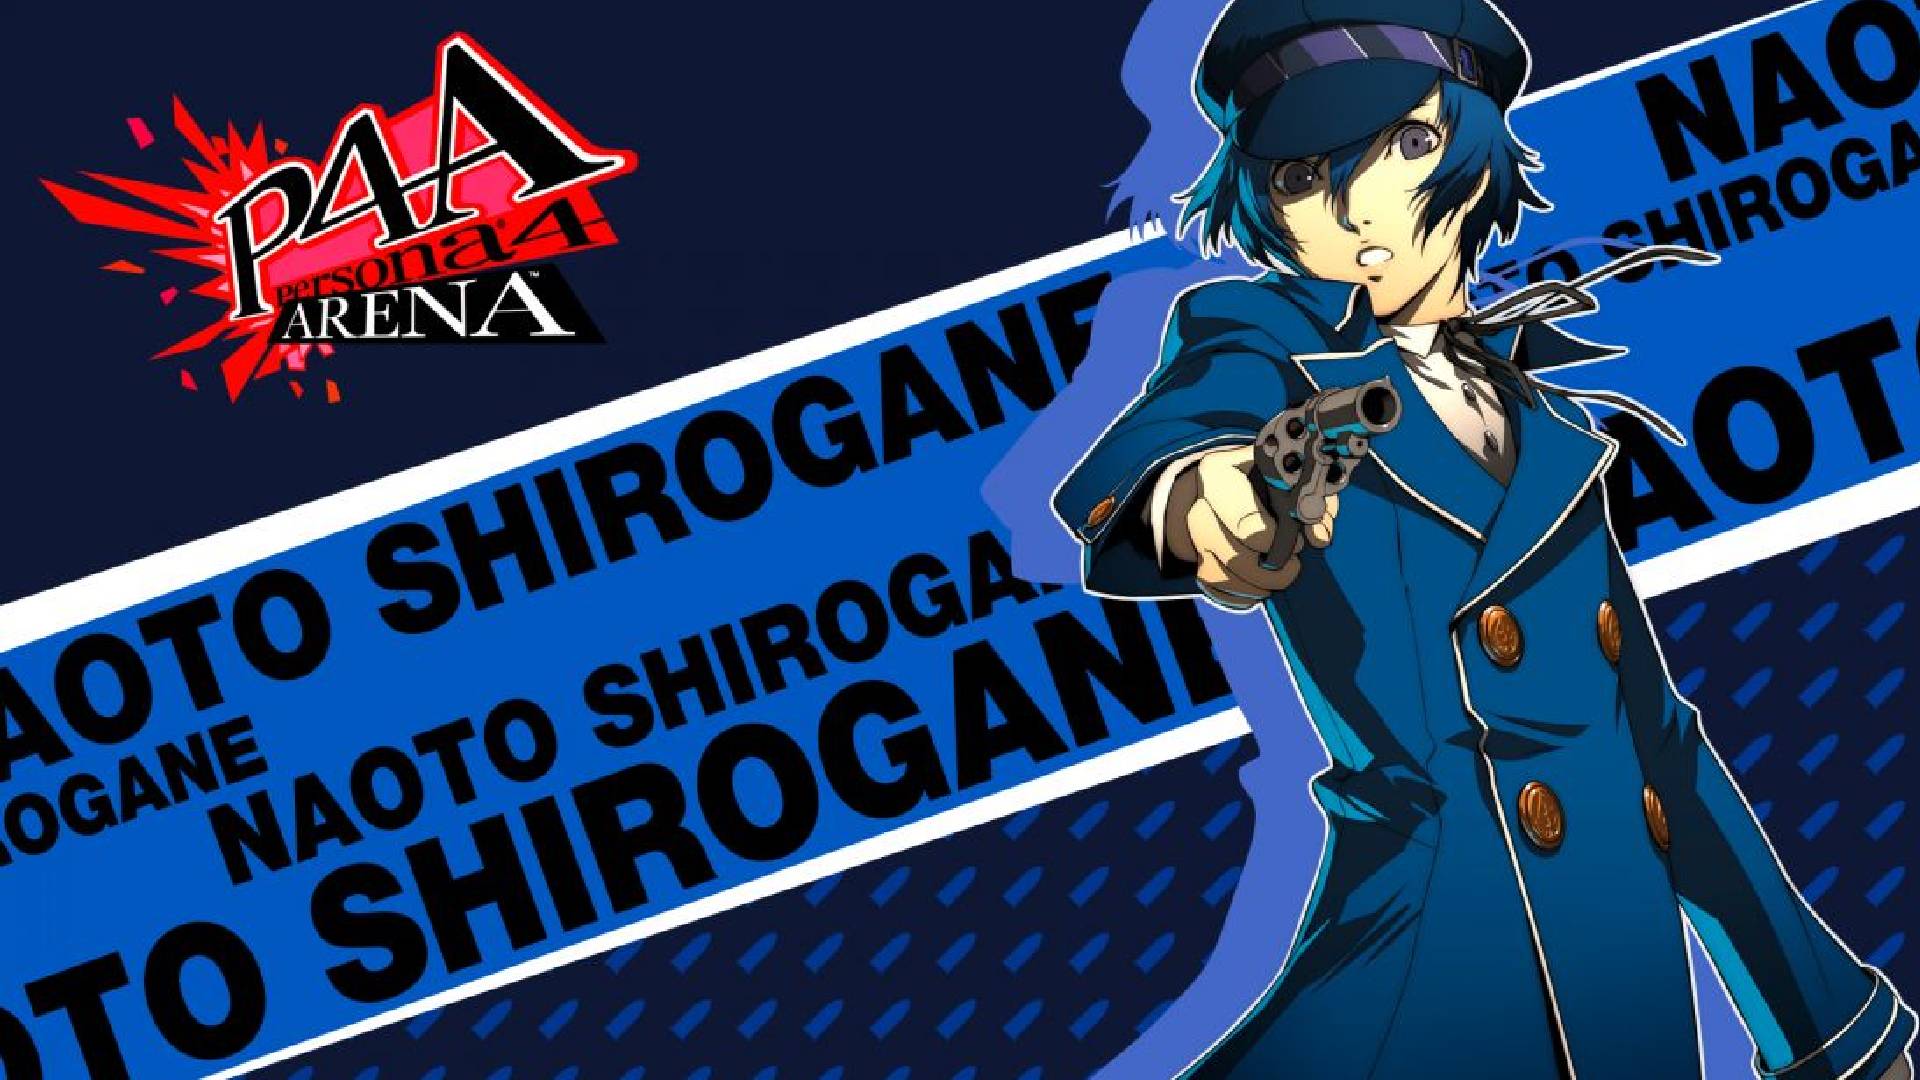 Persona 4 Naoto: An image shows Naoto from Persona 4, the young girl in a detective's outfit with short blue hair